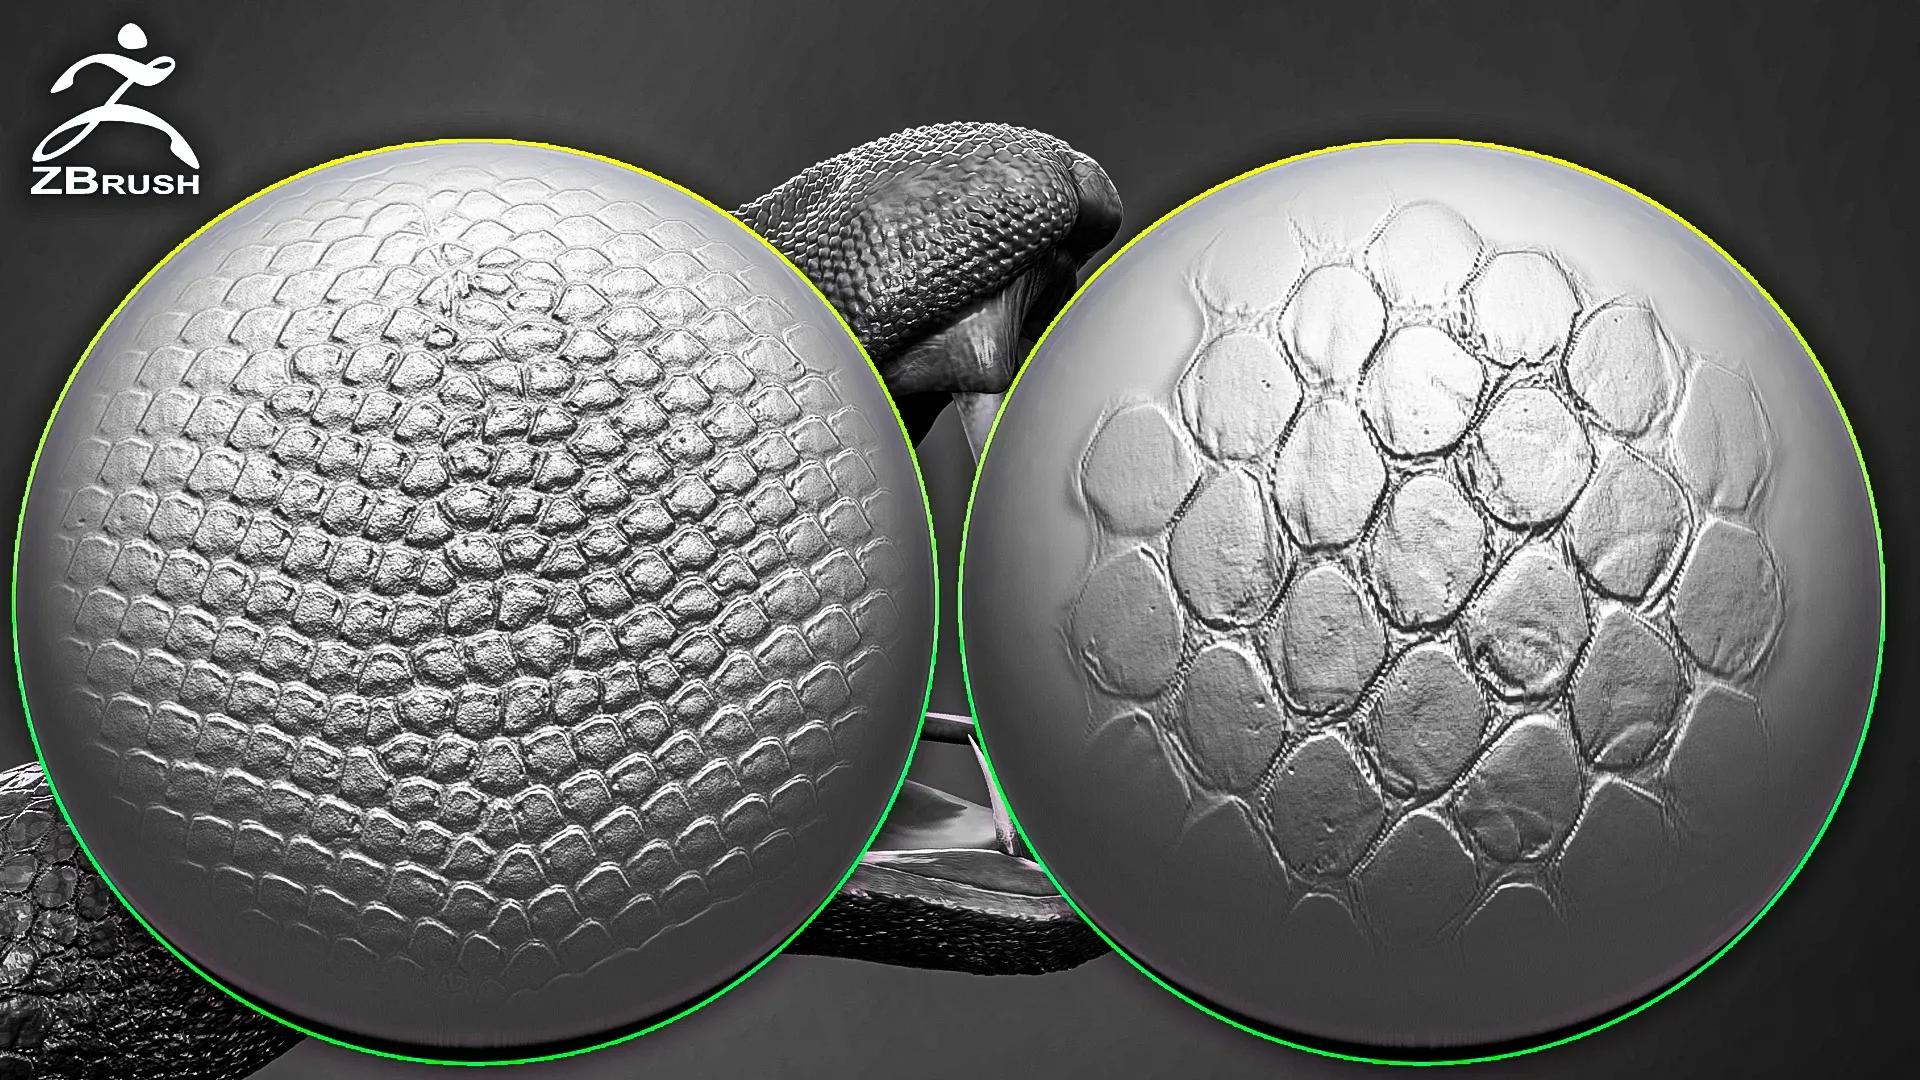 Reptile Skin Alphas for ZBrush